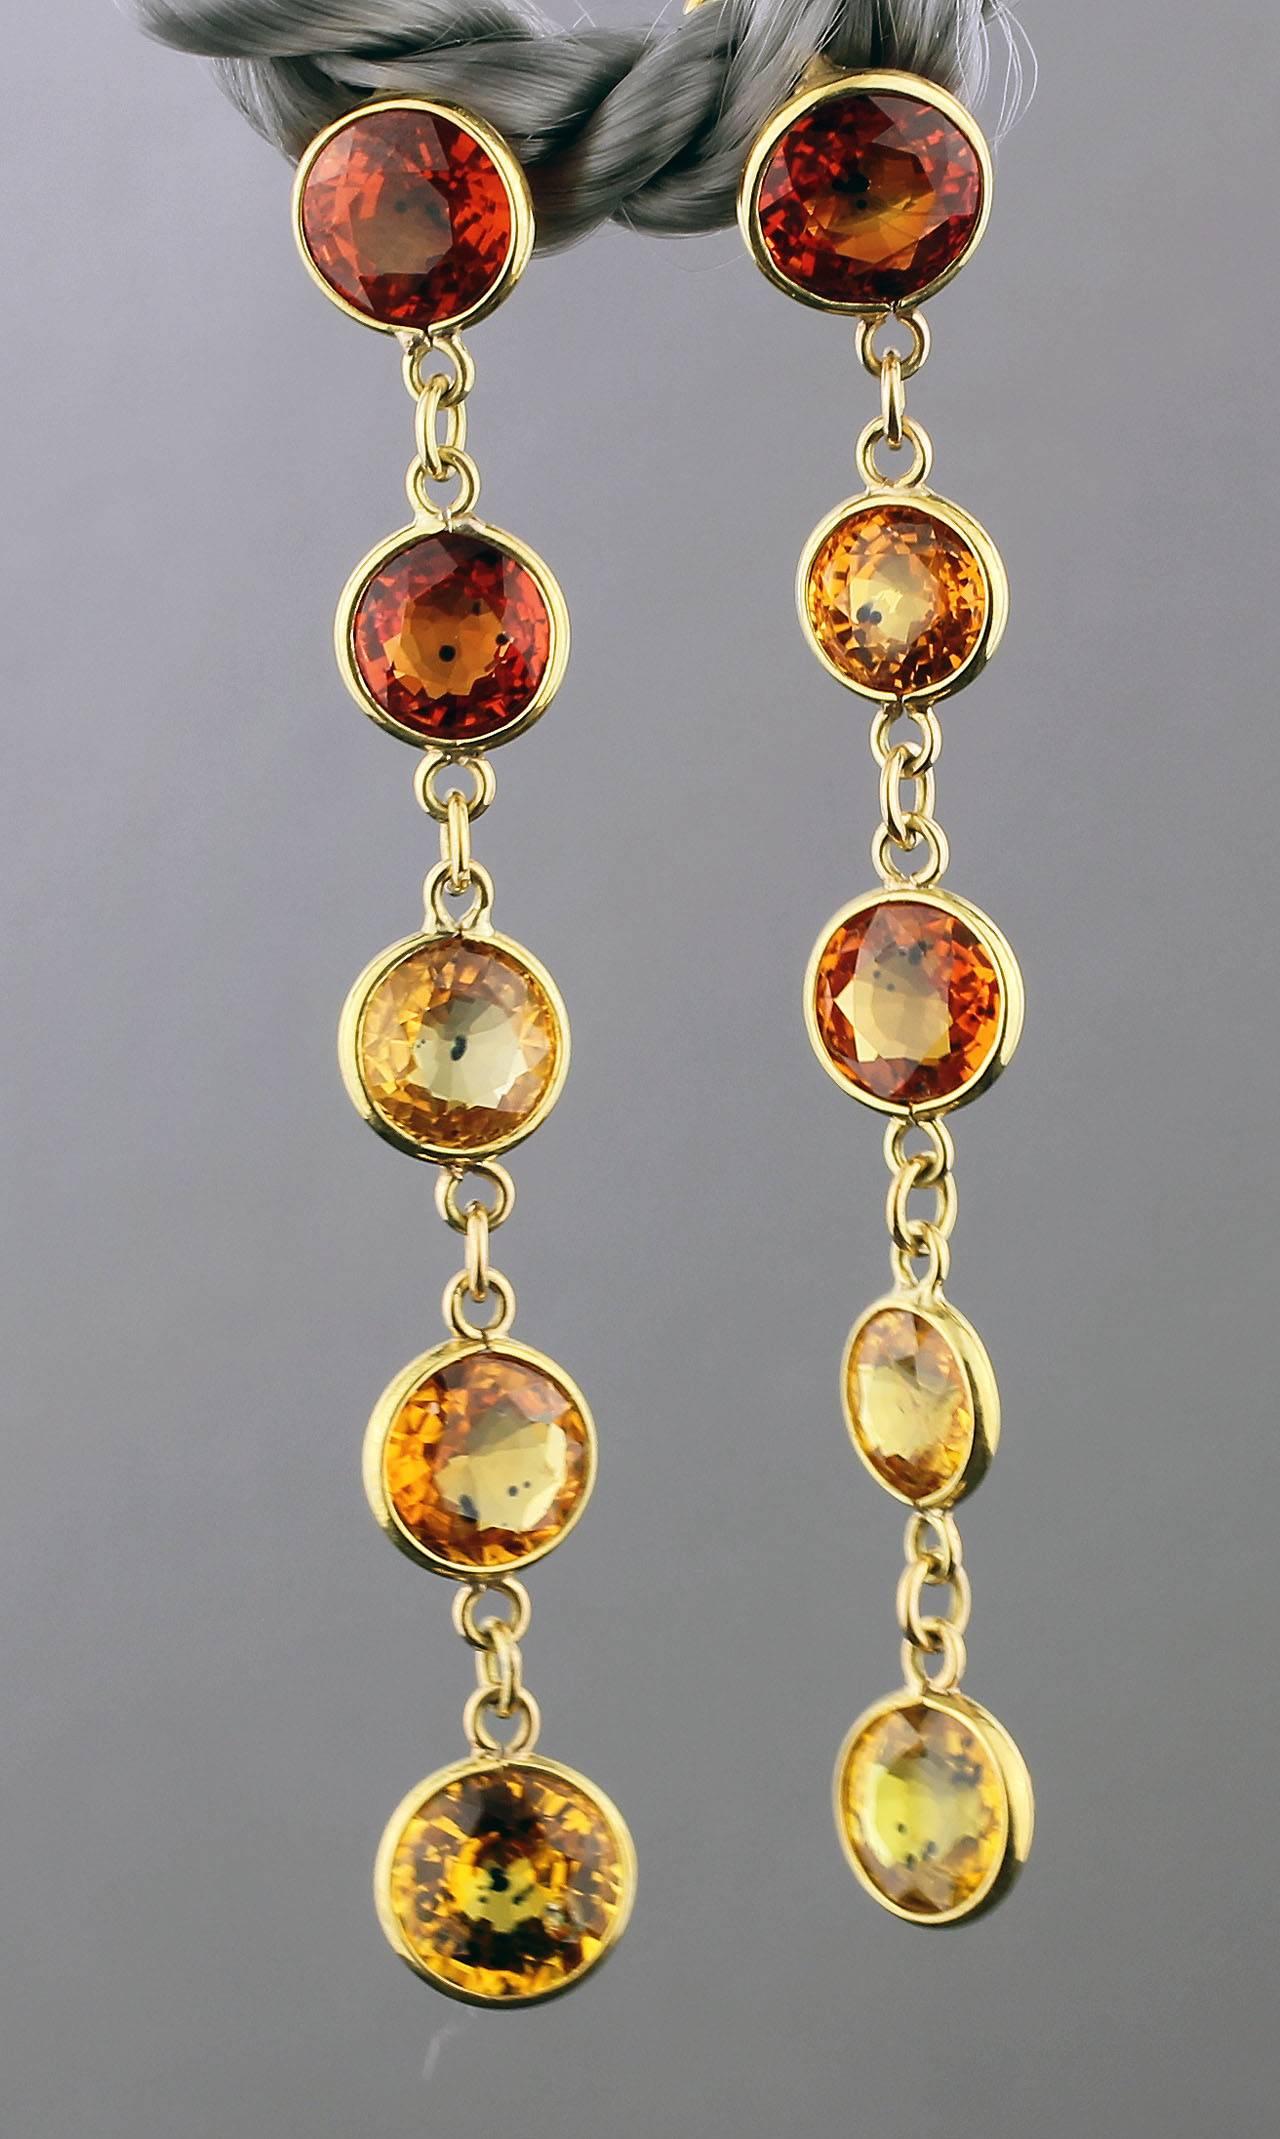 Brilliant glittering unique multi colored 16 carats of unique natural RARE type of Songea Sapphires set in handmade 18Kt yellow gold stud earrings.  They come from the mines in Africa and hang 2.26 inches long and measure approximately 6 mm each. 